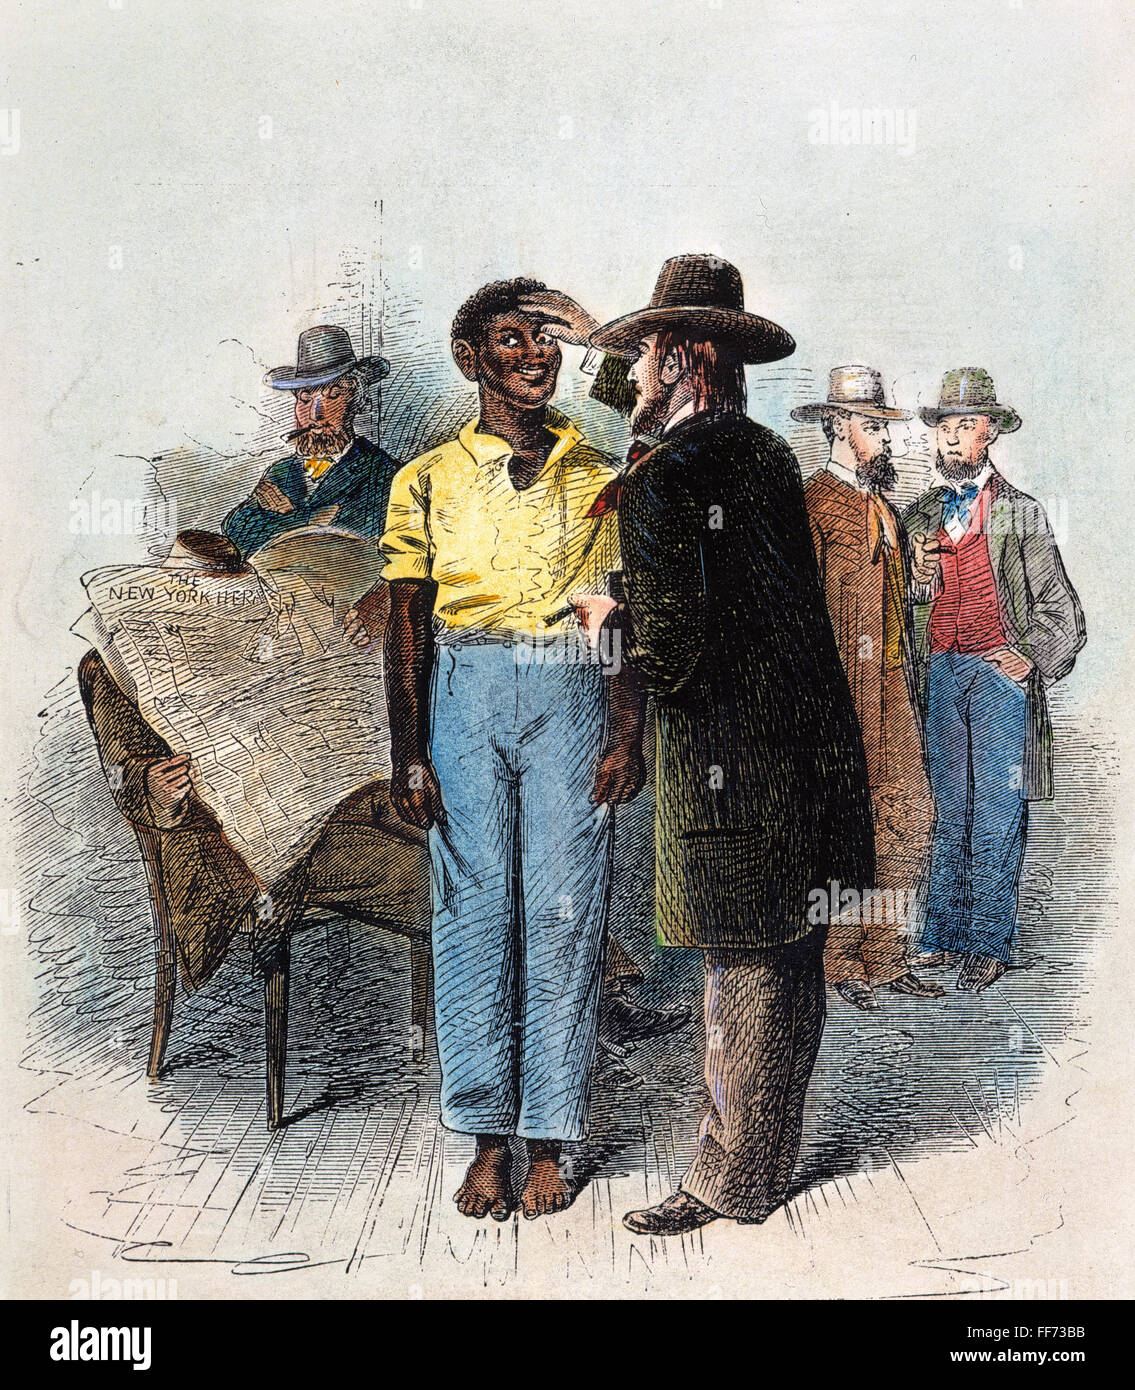 VIRGINIA: SLAVE INSPECTION. /nInspection by dealers at a slave auction in Virginia. Wood engraving, English, 1861. Stock Photo